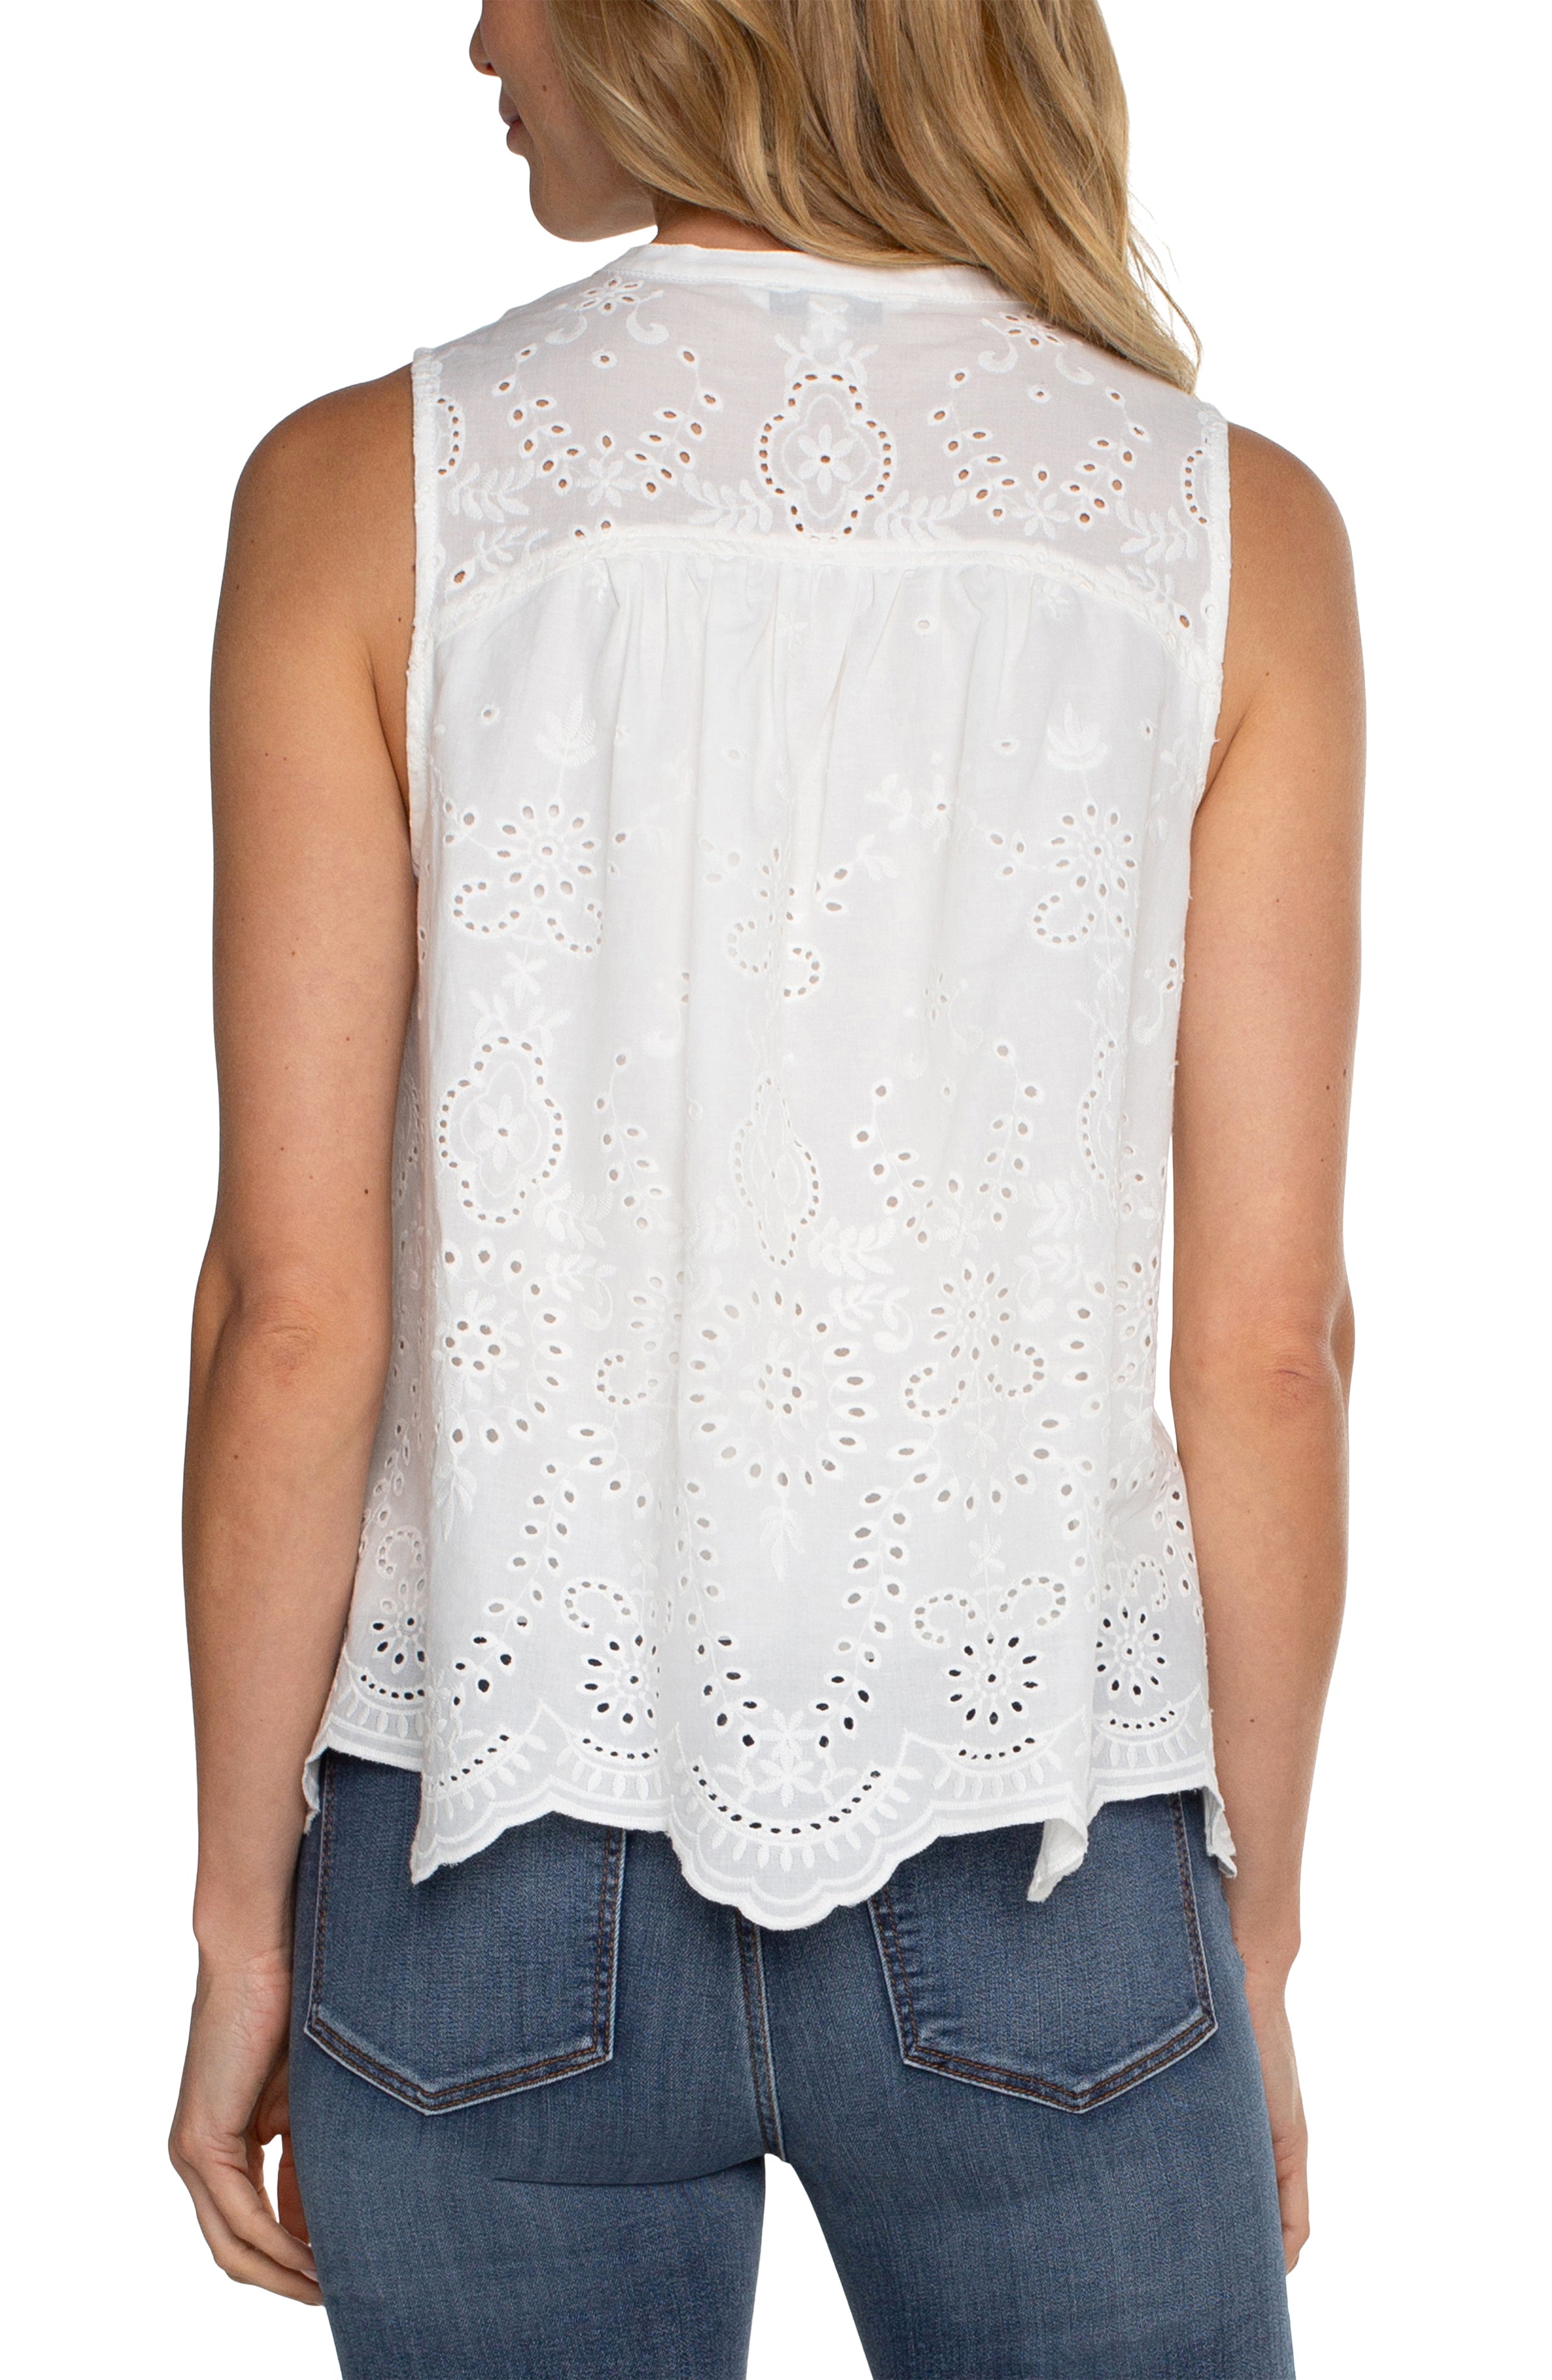 LVP Sleeveless Embroidered Woven Top with Pin tucks - White Back View